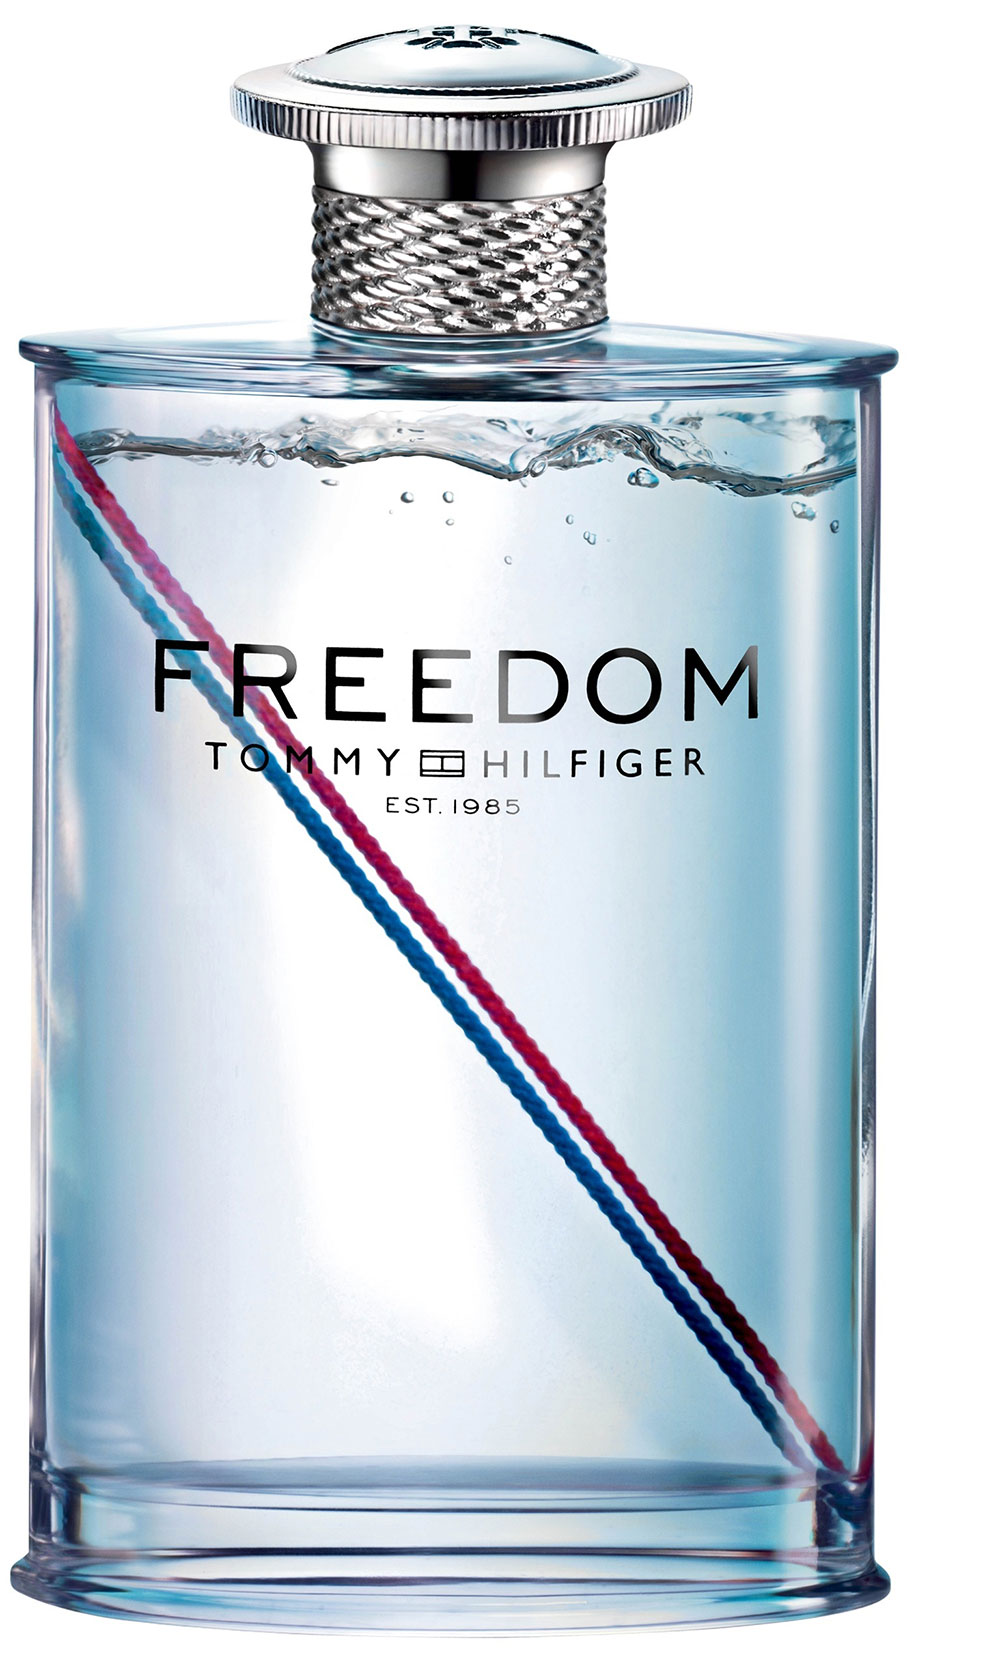  Tommy Hillfiger Freedom 